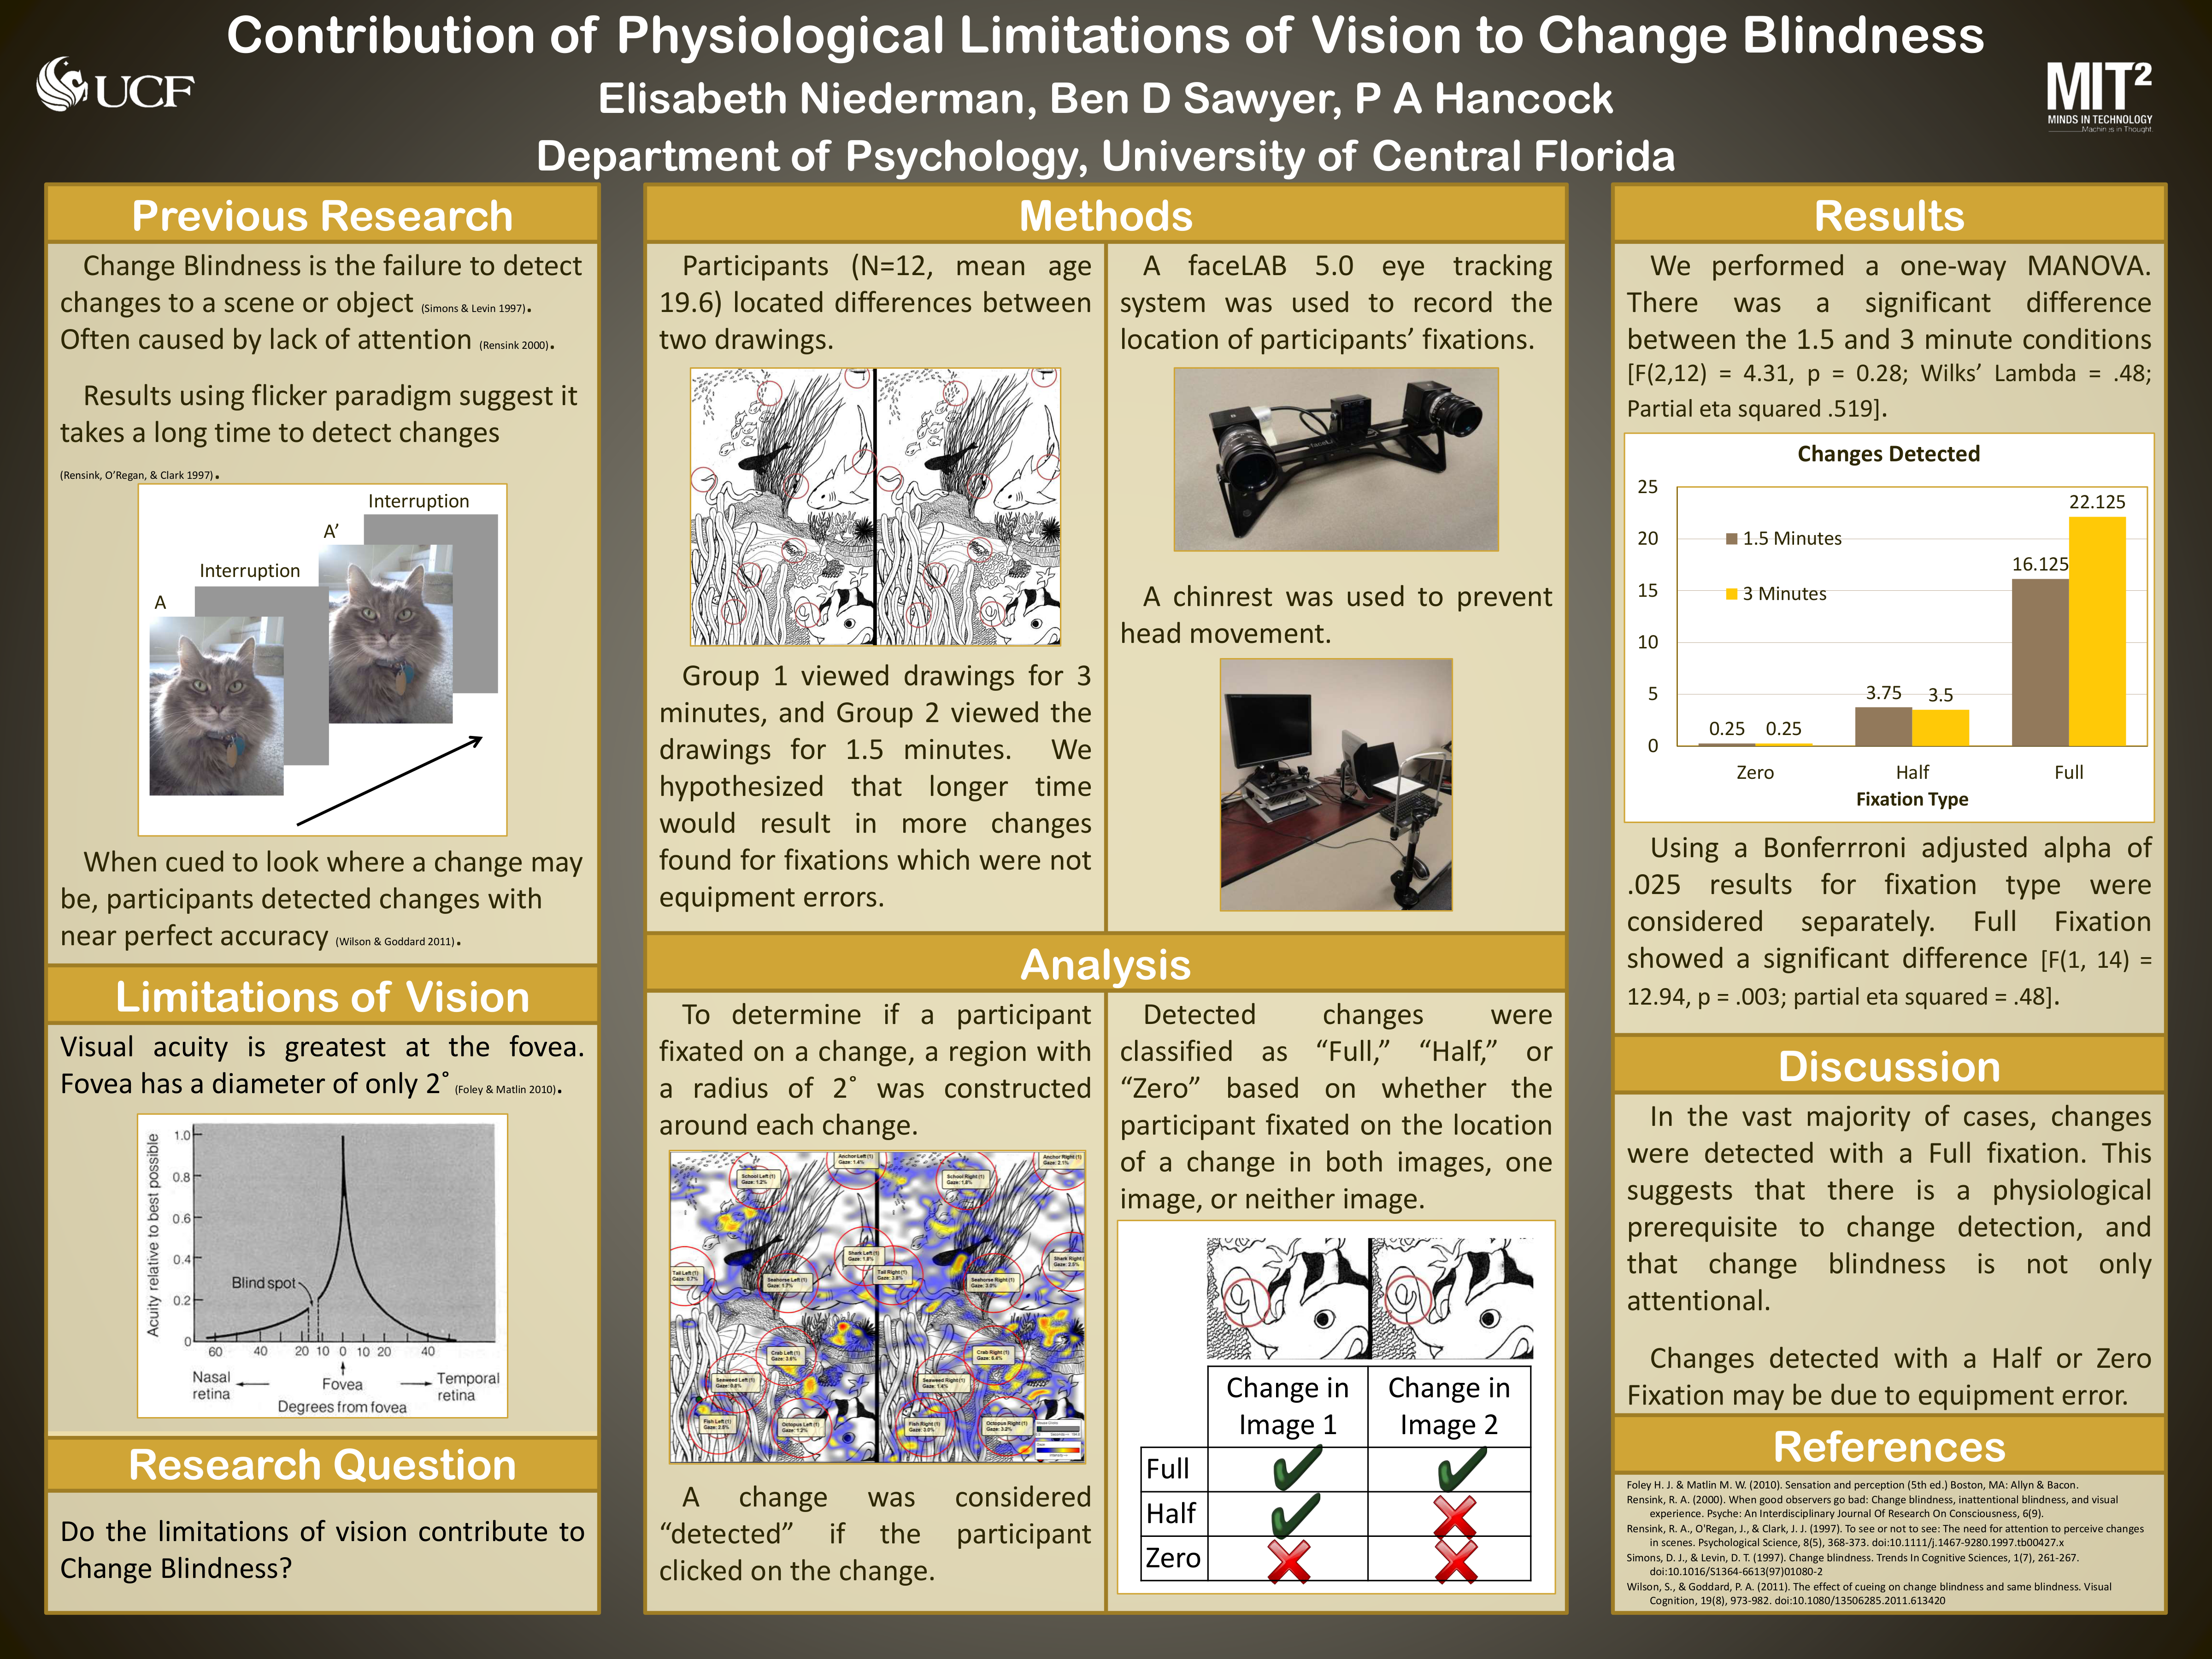 Niederman, E., Sawyer, B. D., & Hancock, P. A. (2013, April). Contribution of Physiological Limitations of Vision to Change Blindness. Poster presented at the Showcase of Undergraduate Research Excellence at the University of Central Florida, Orlando, FL.